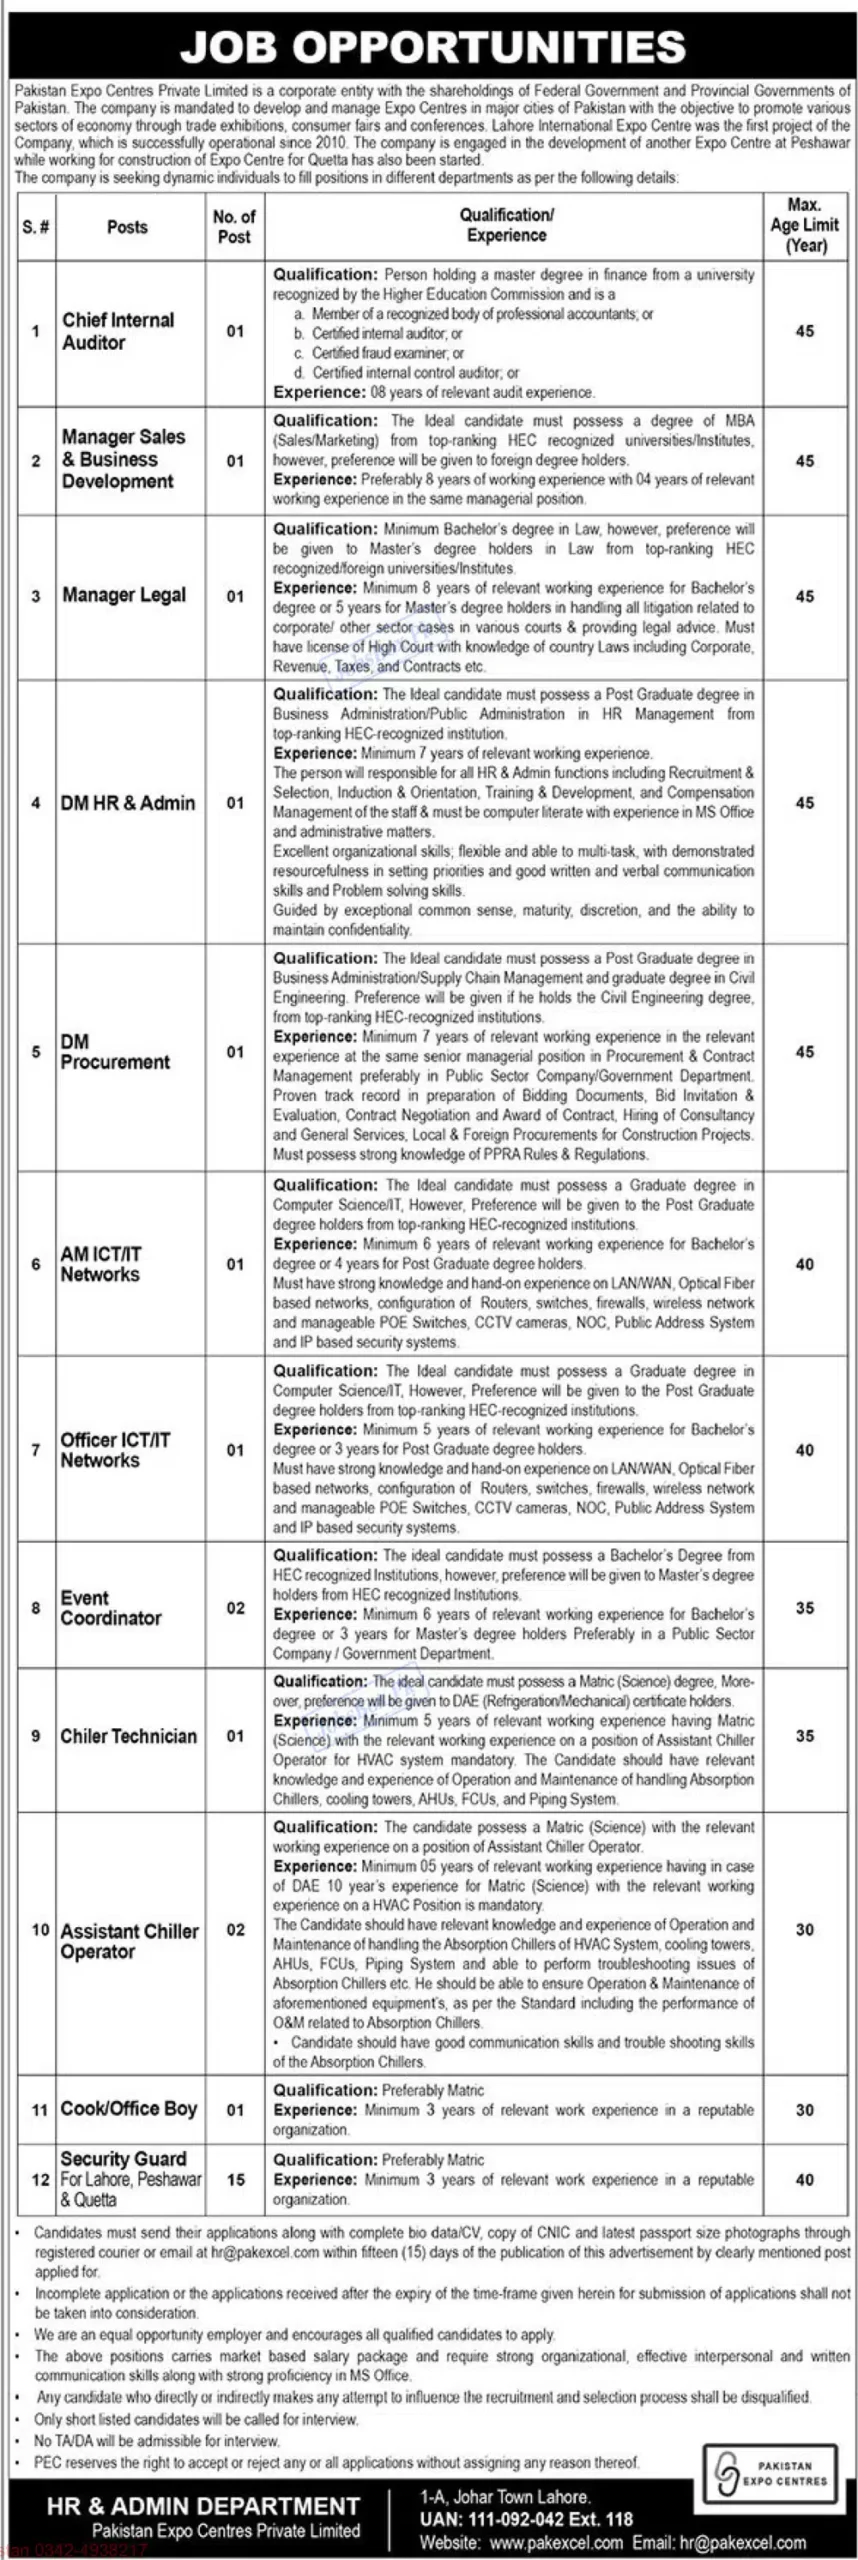 Pakistan Expo Centres Private Limited Jobs 2023 New Vacancies